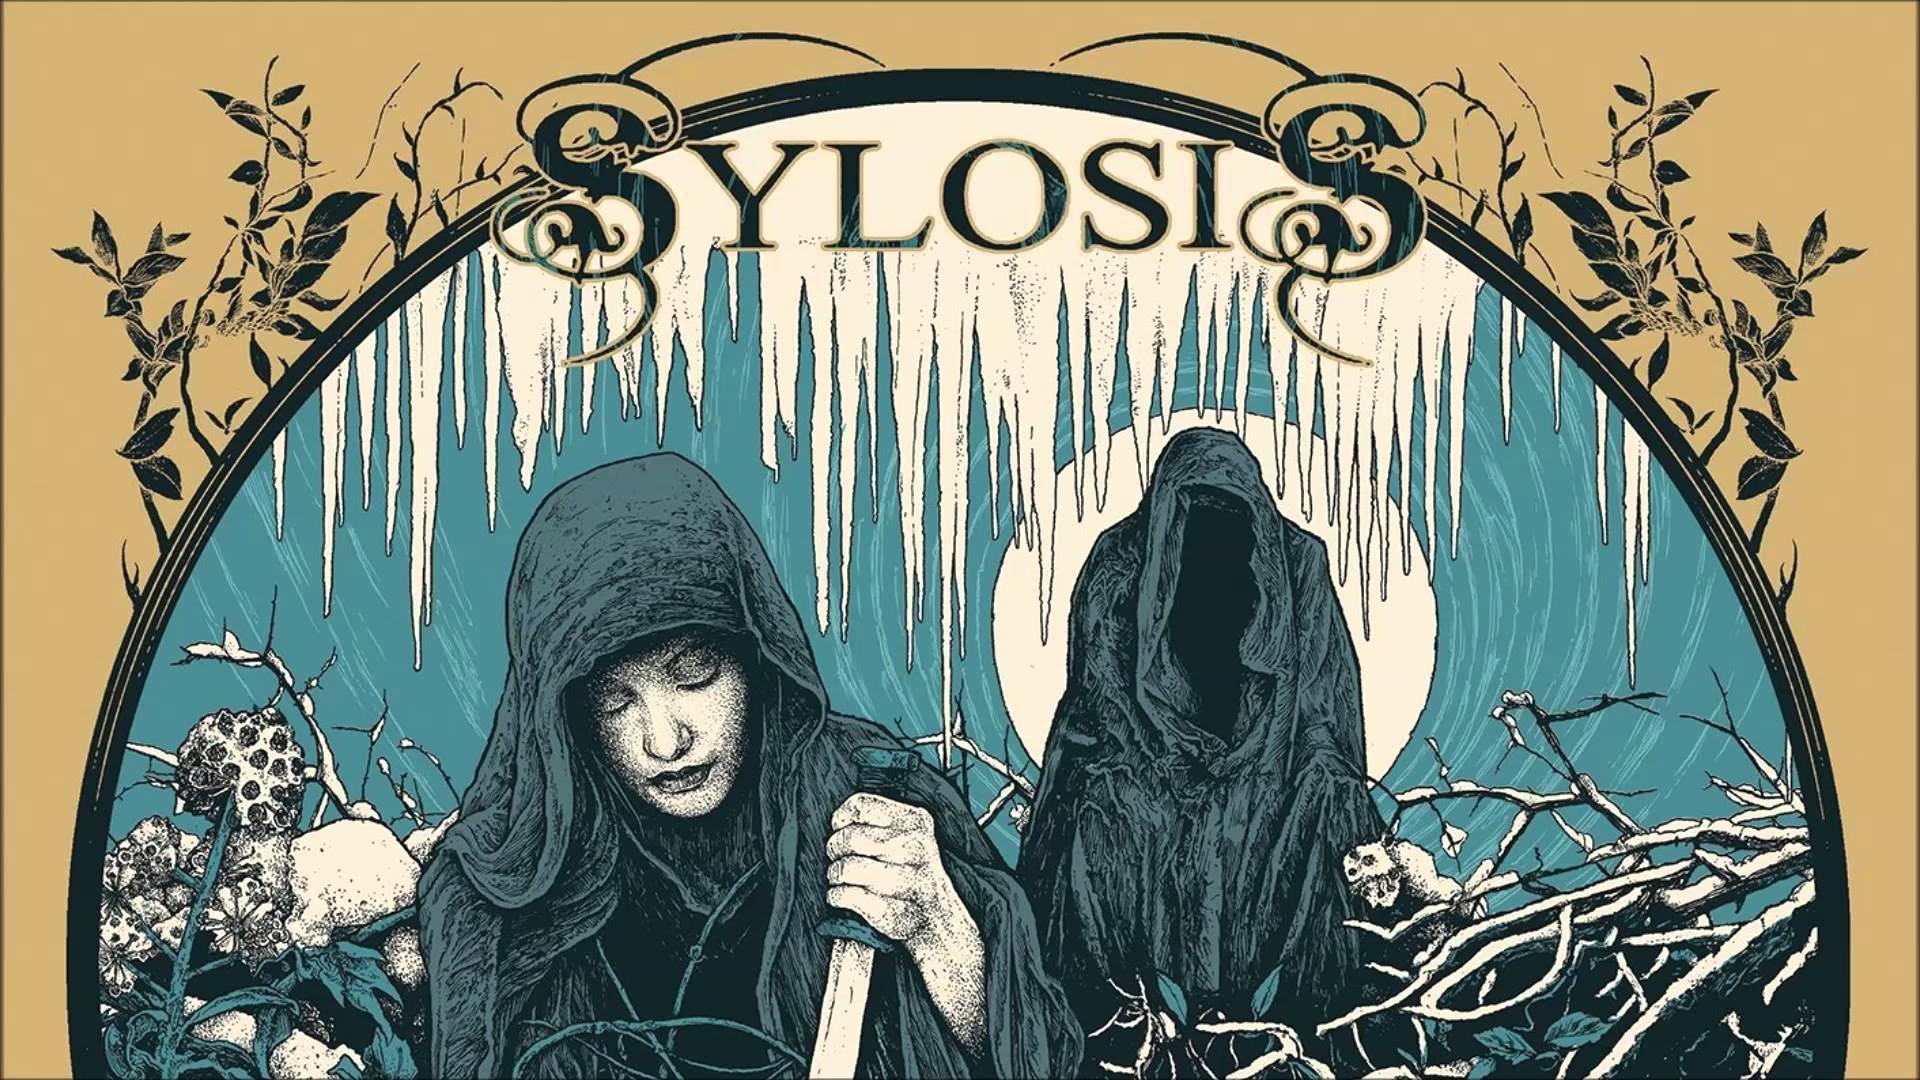 Sylosis Wallpapers